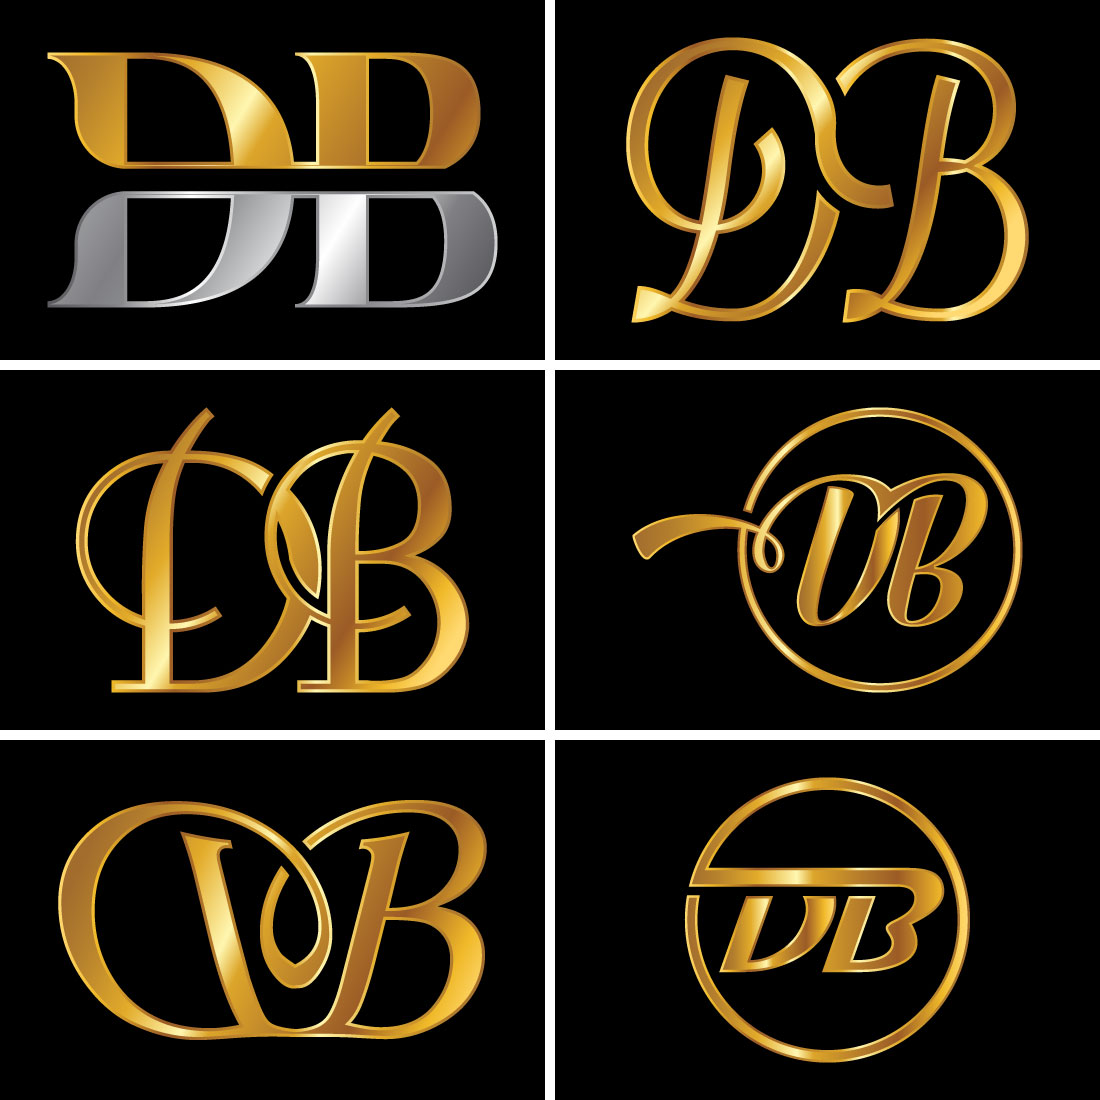 Initial Letter D B Logo Design Vector Template. Graphic Alphabet Symbol For Corporate Business Identity